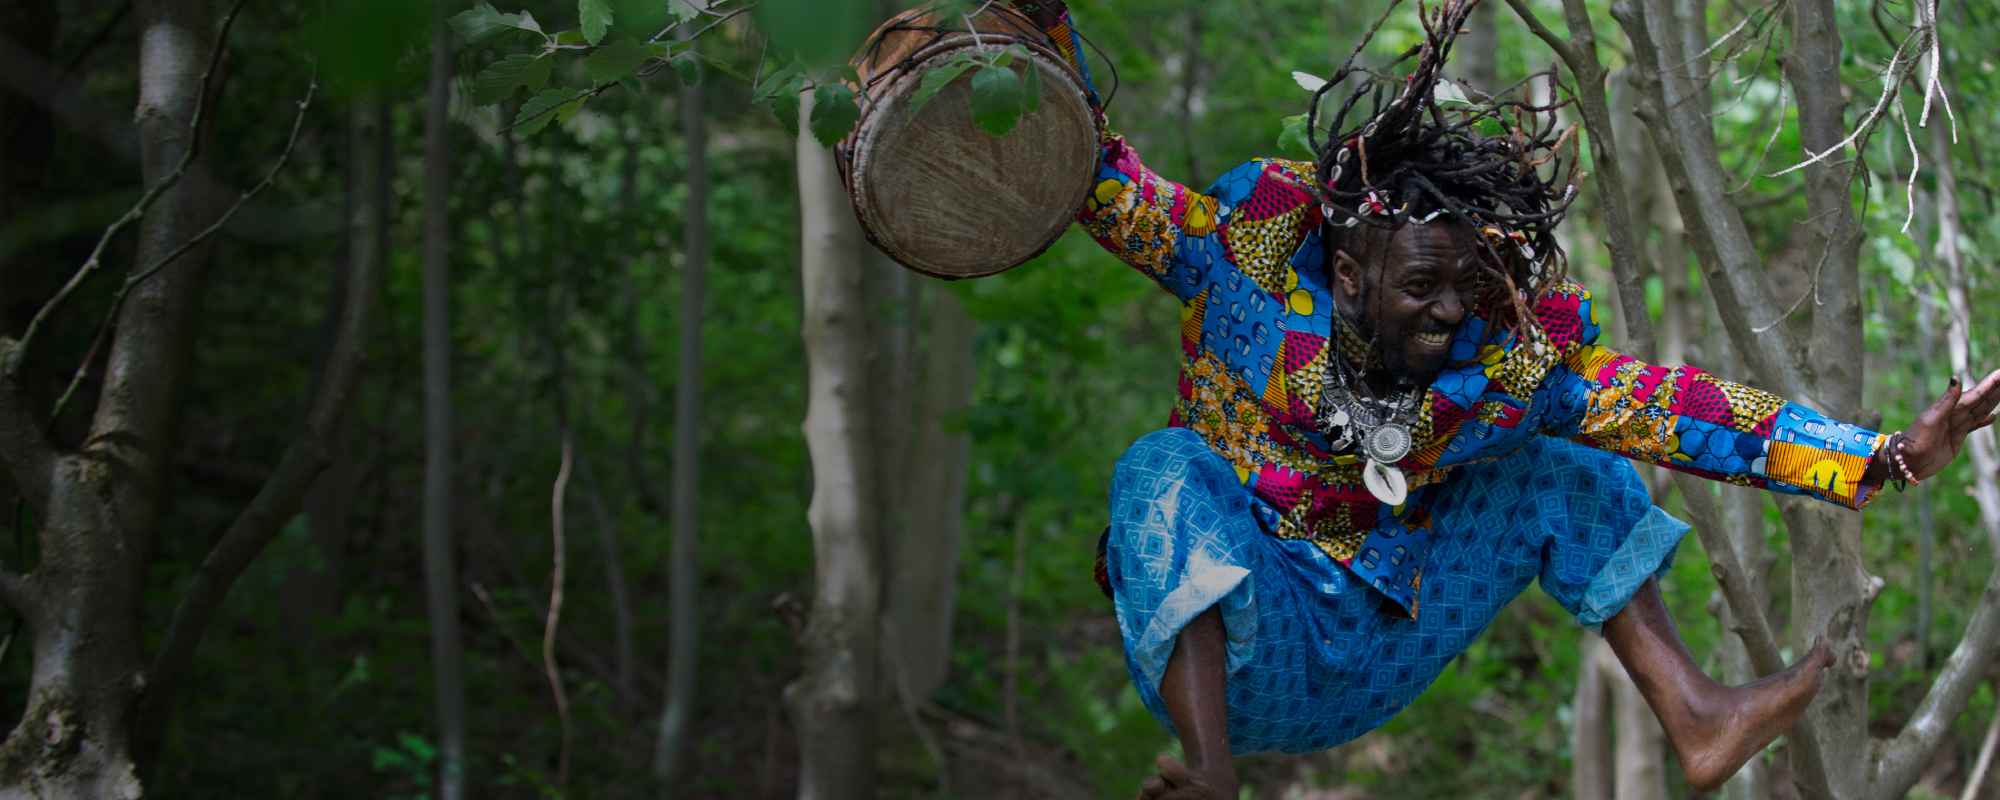 Man in woods jumping with drum